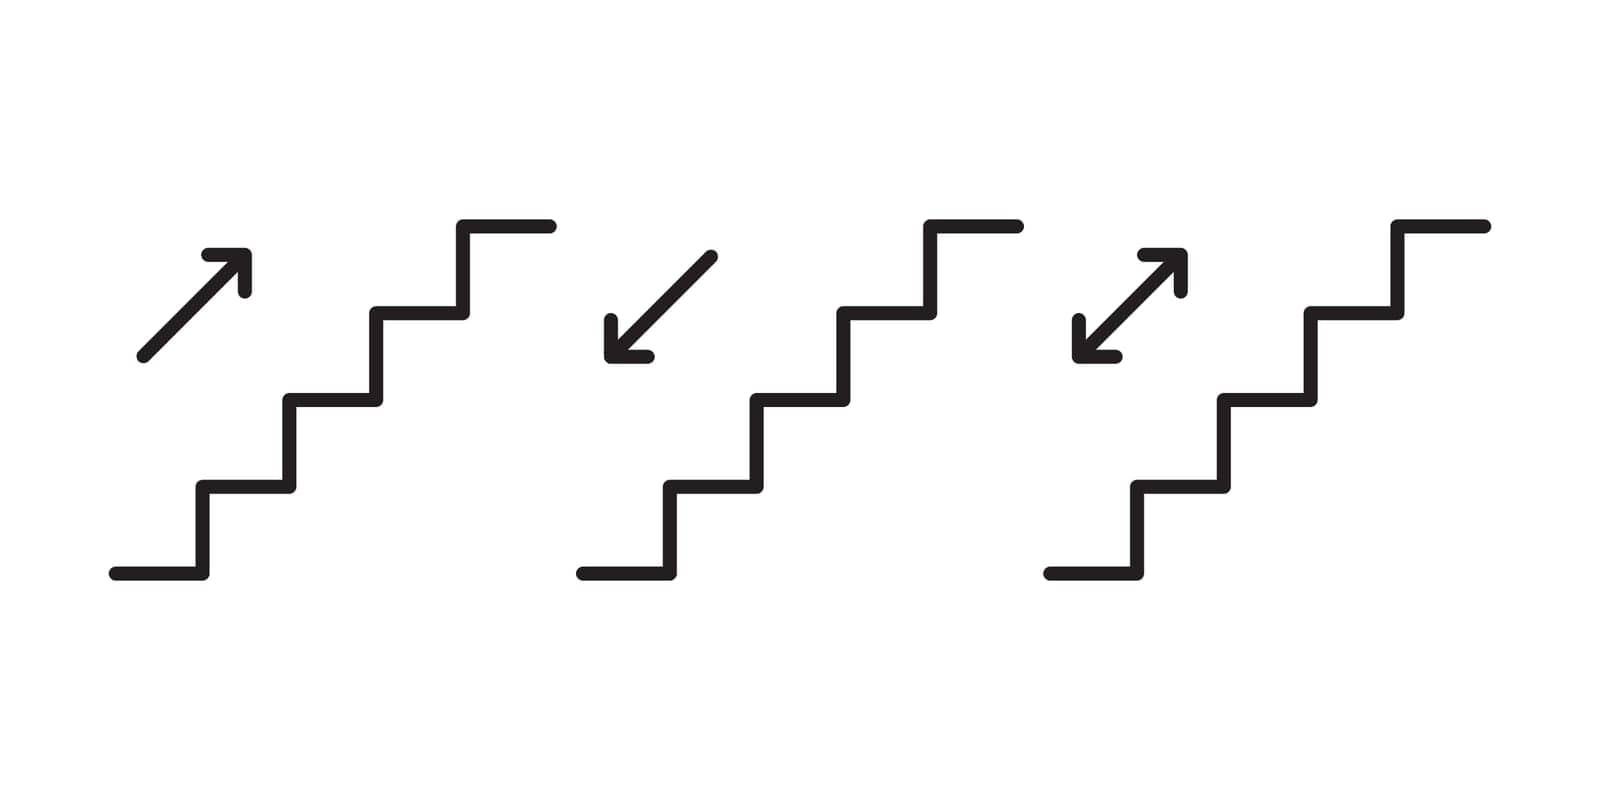 Stairs icon set with arrows